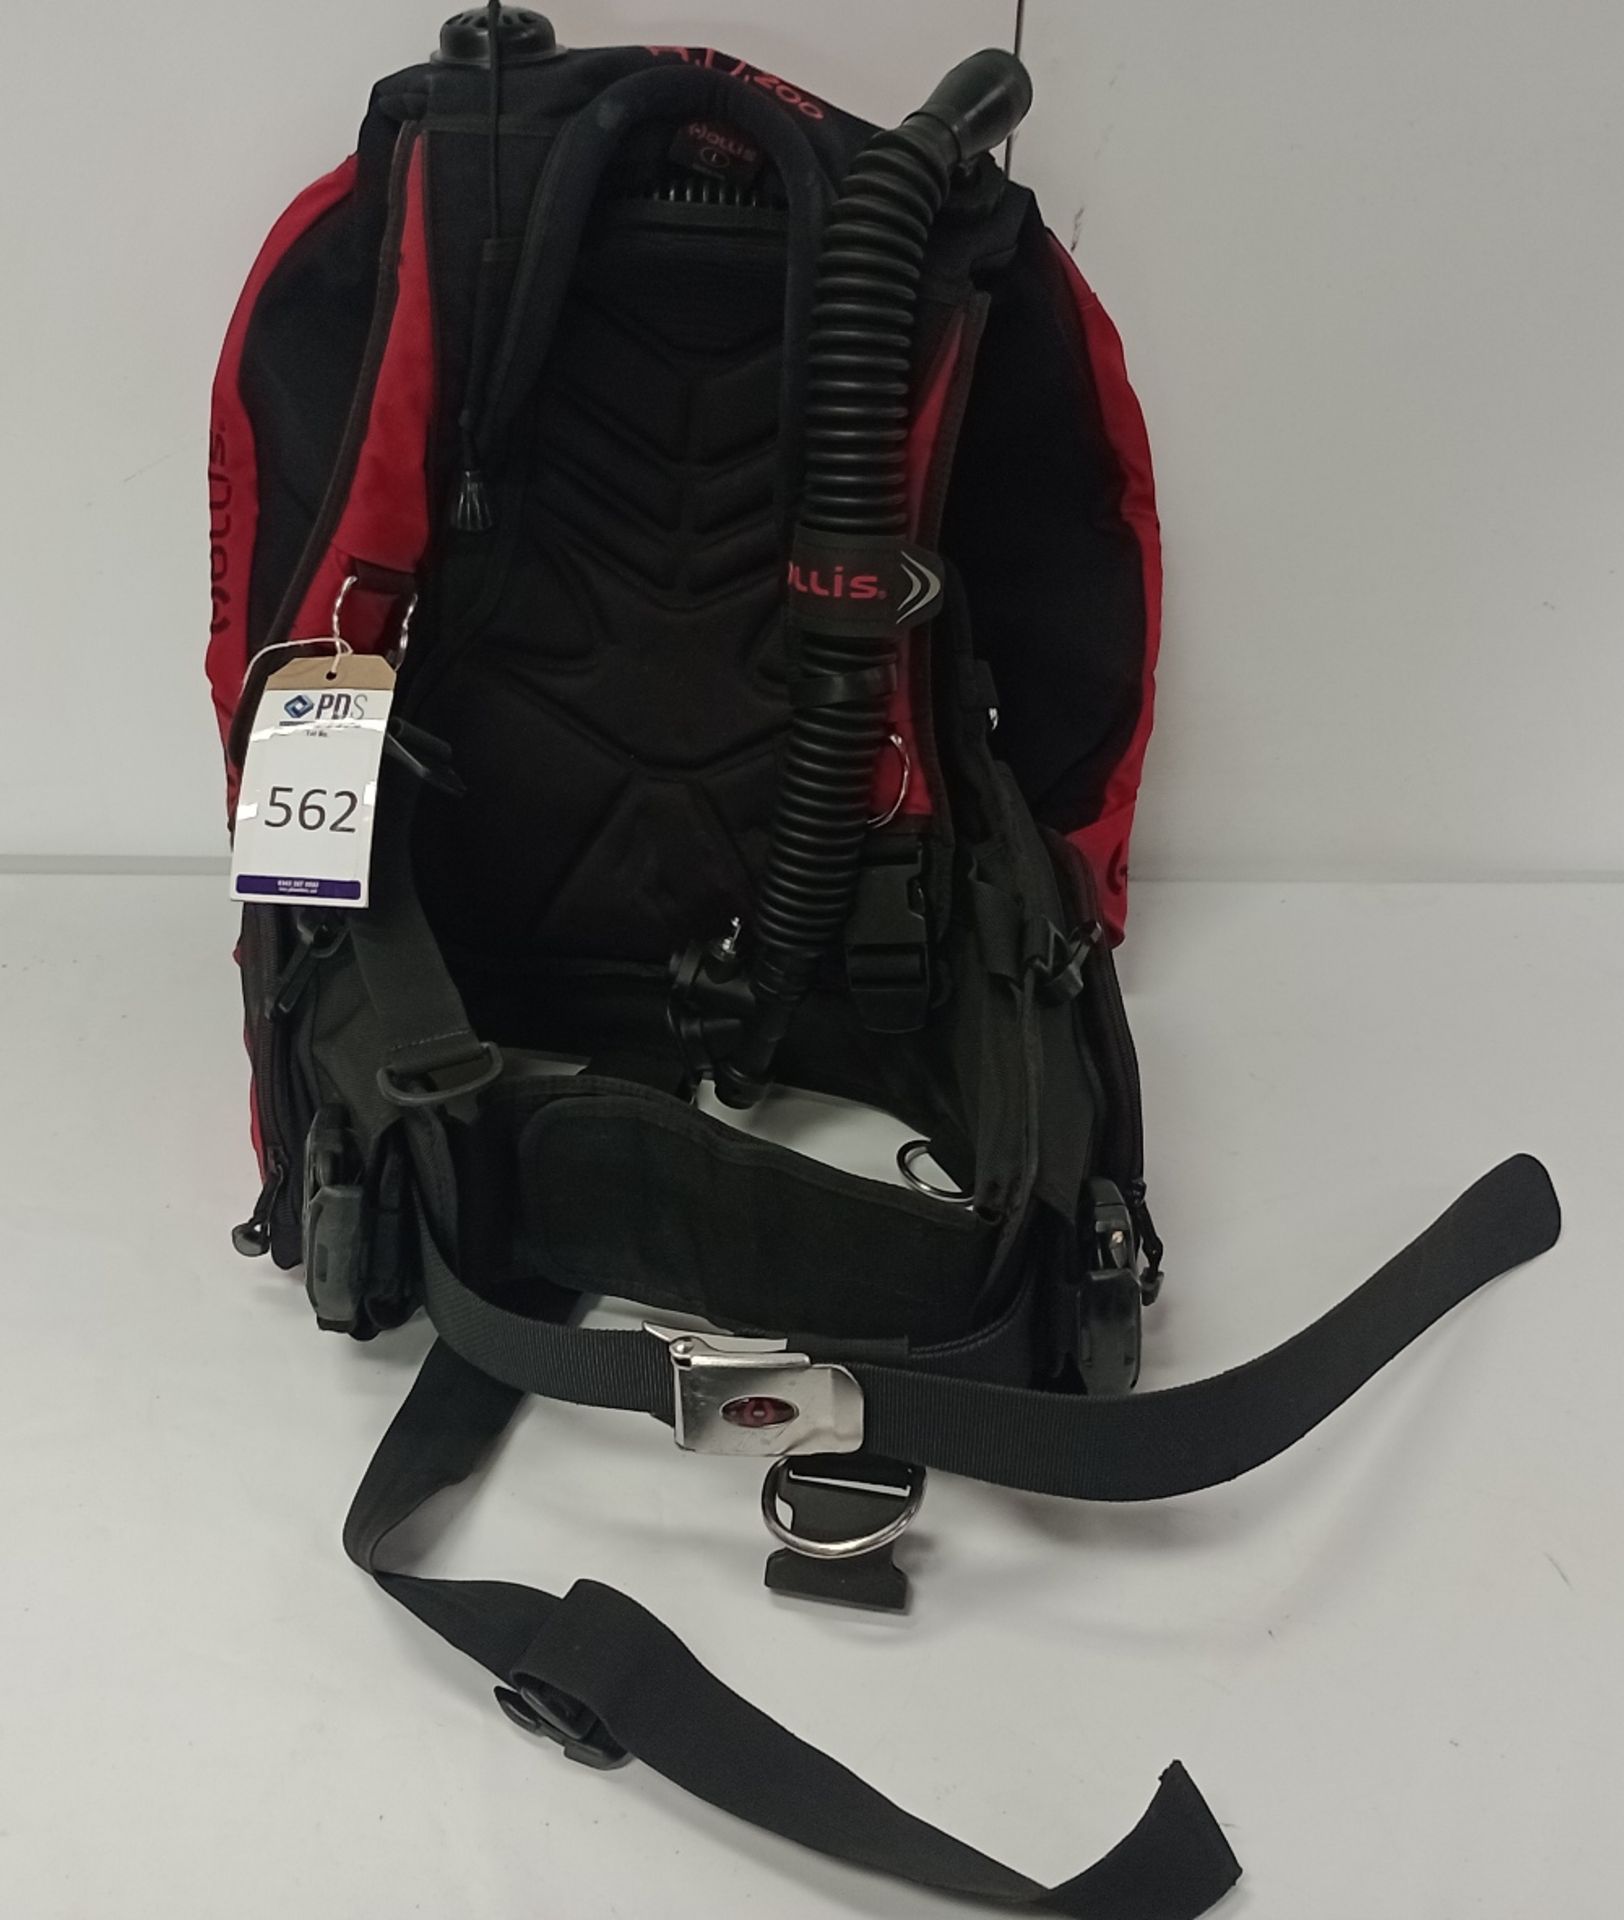 Hollis HD200 Buoyancy Control Device, Size L (Location: Brentwood. Please Refer to General Notes)